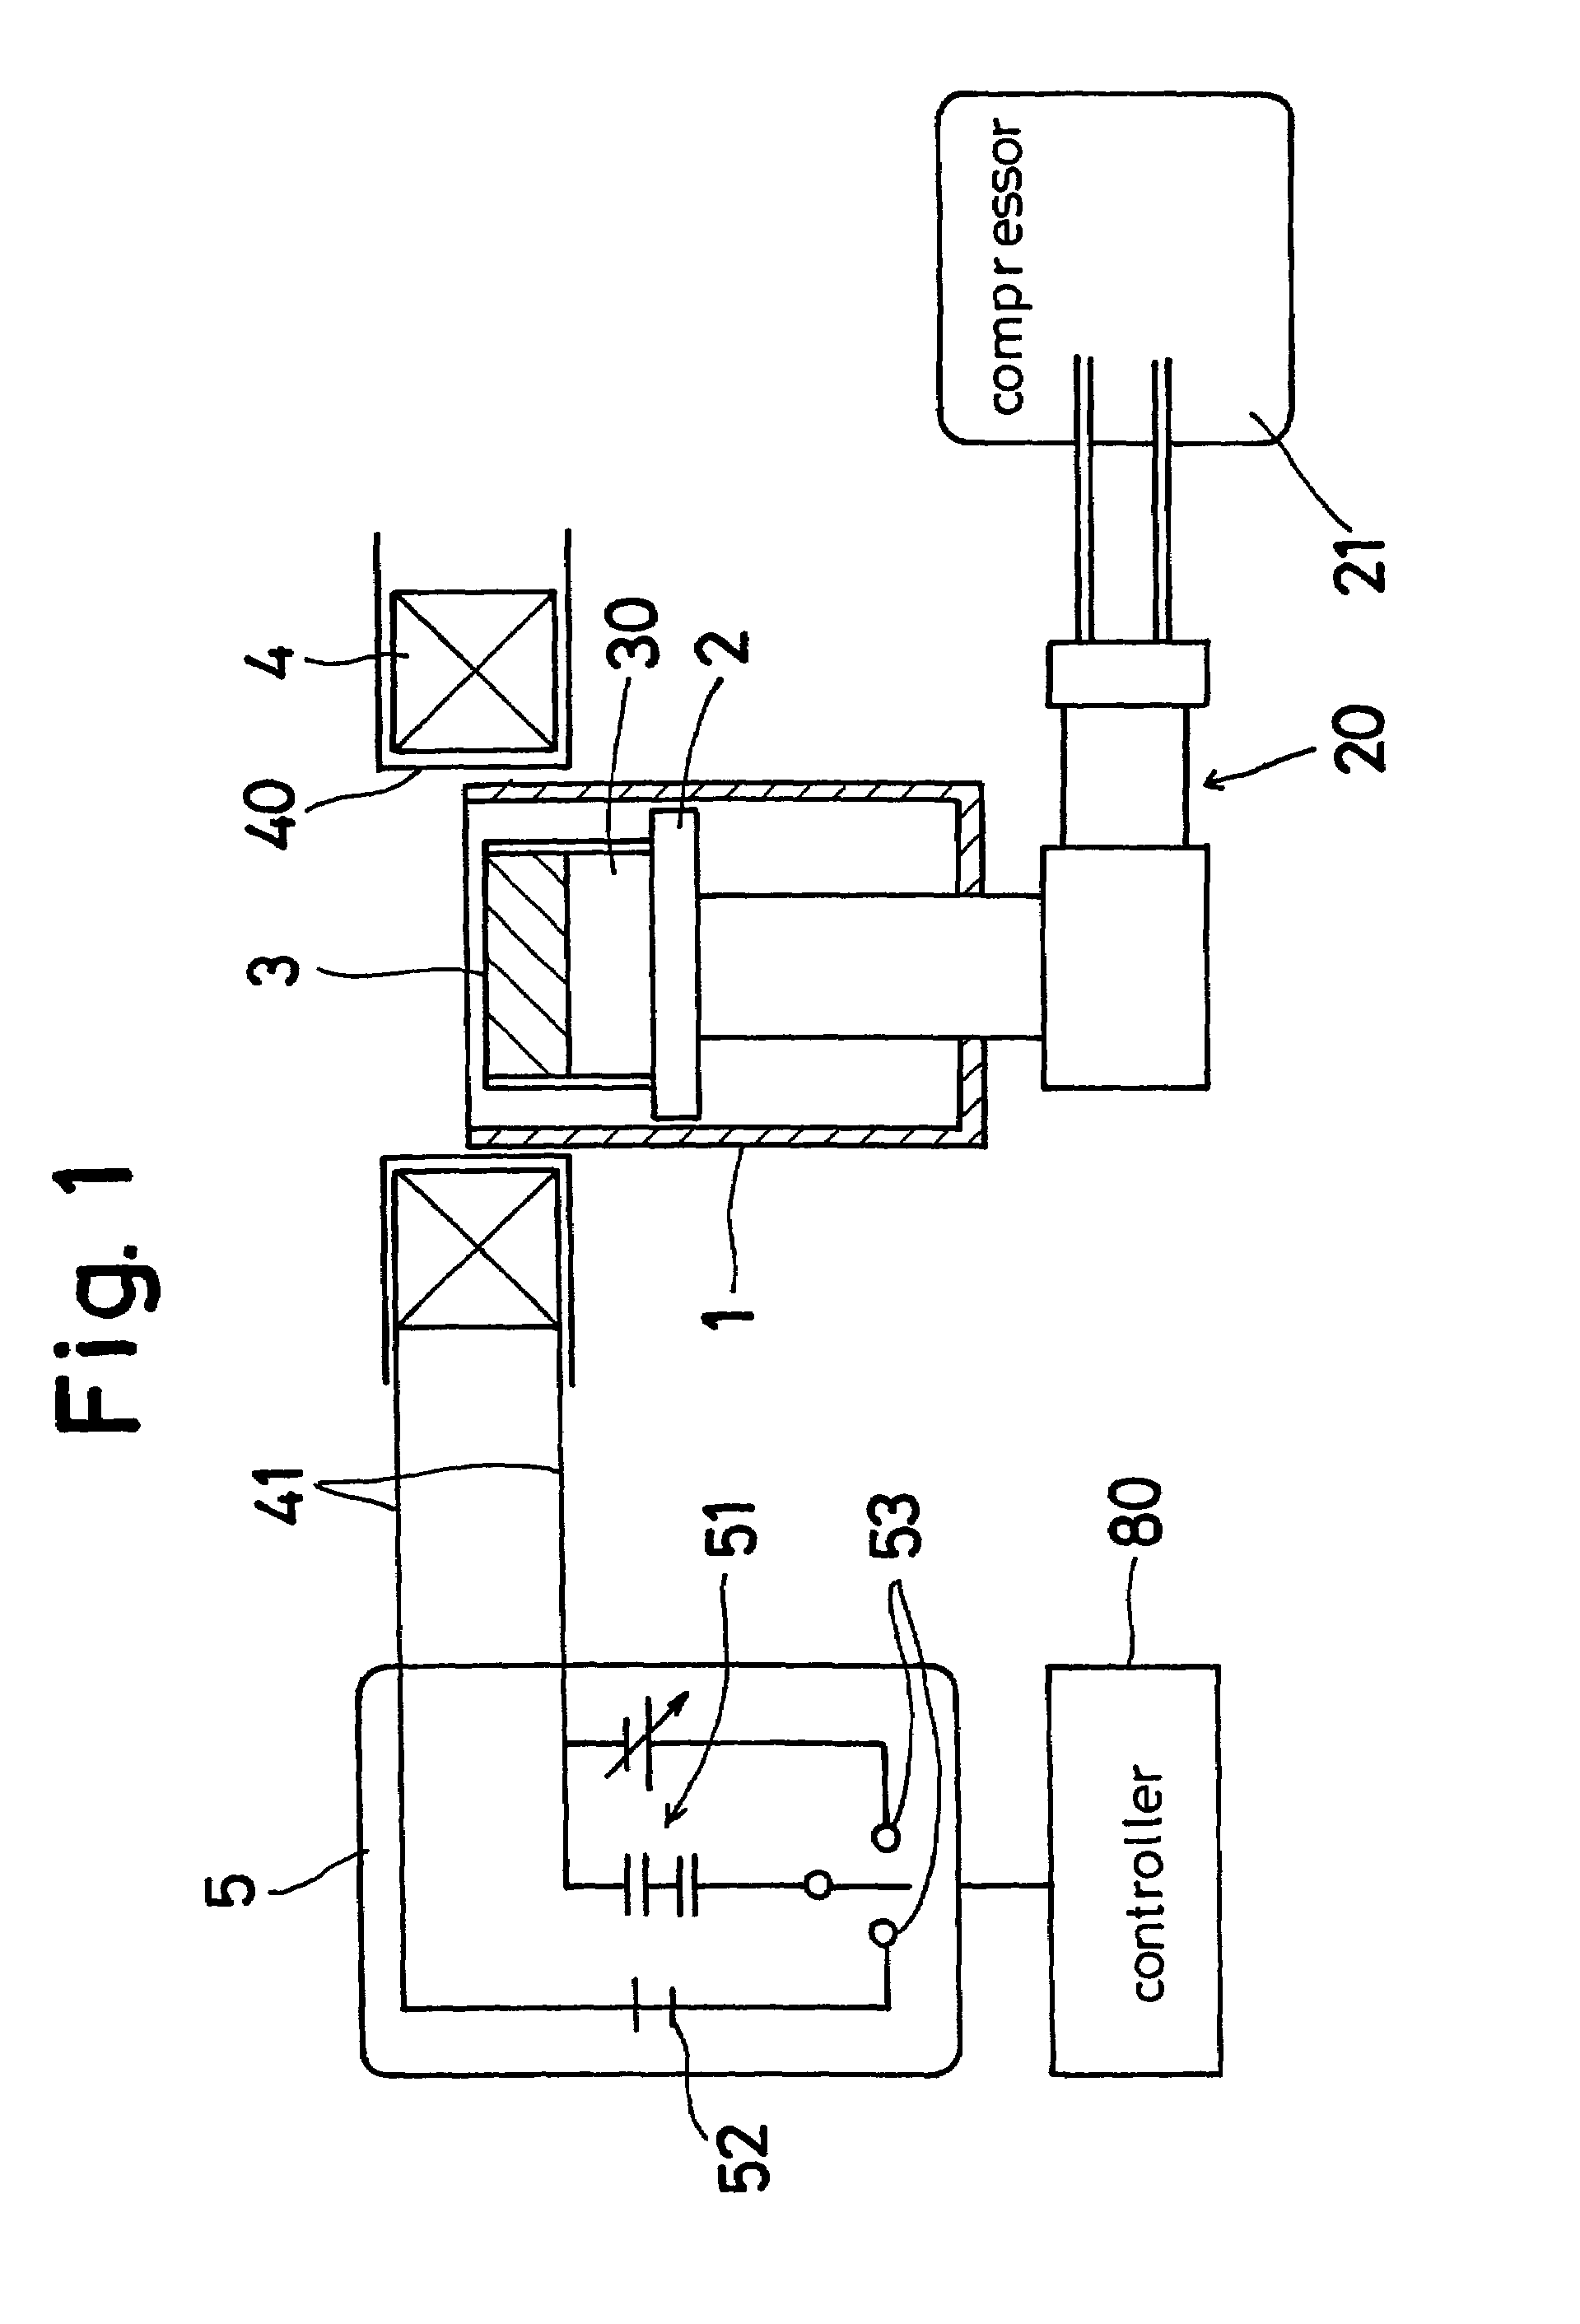 Superconducting magnet apparatus and method for magnetizing superconductor